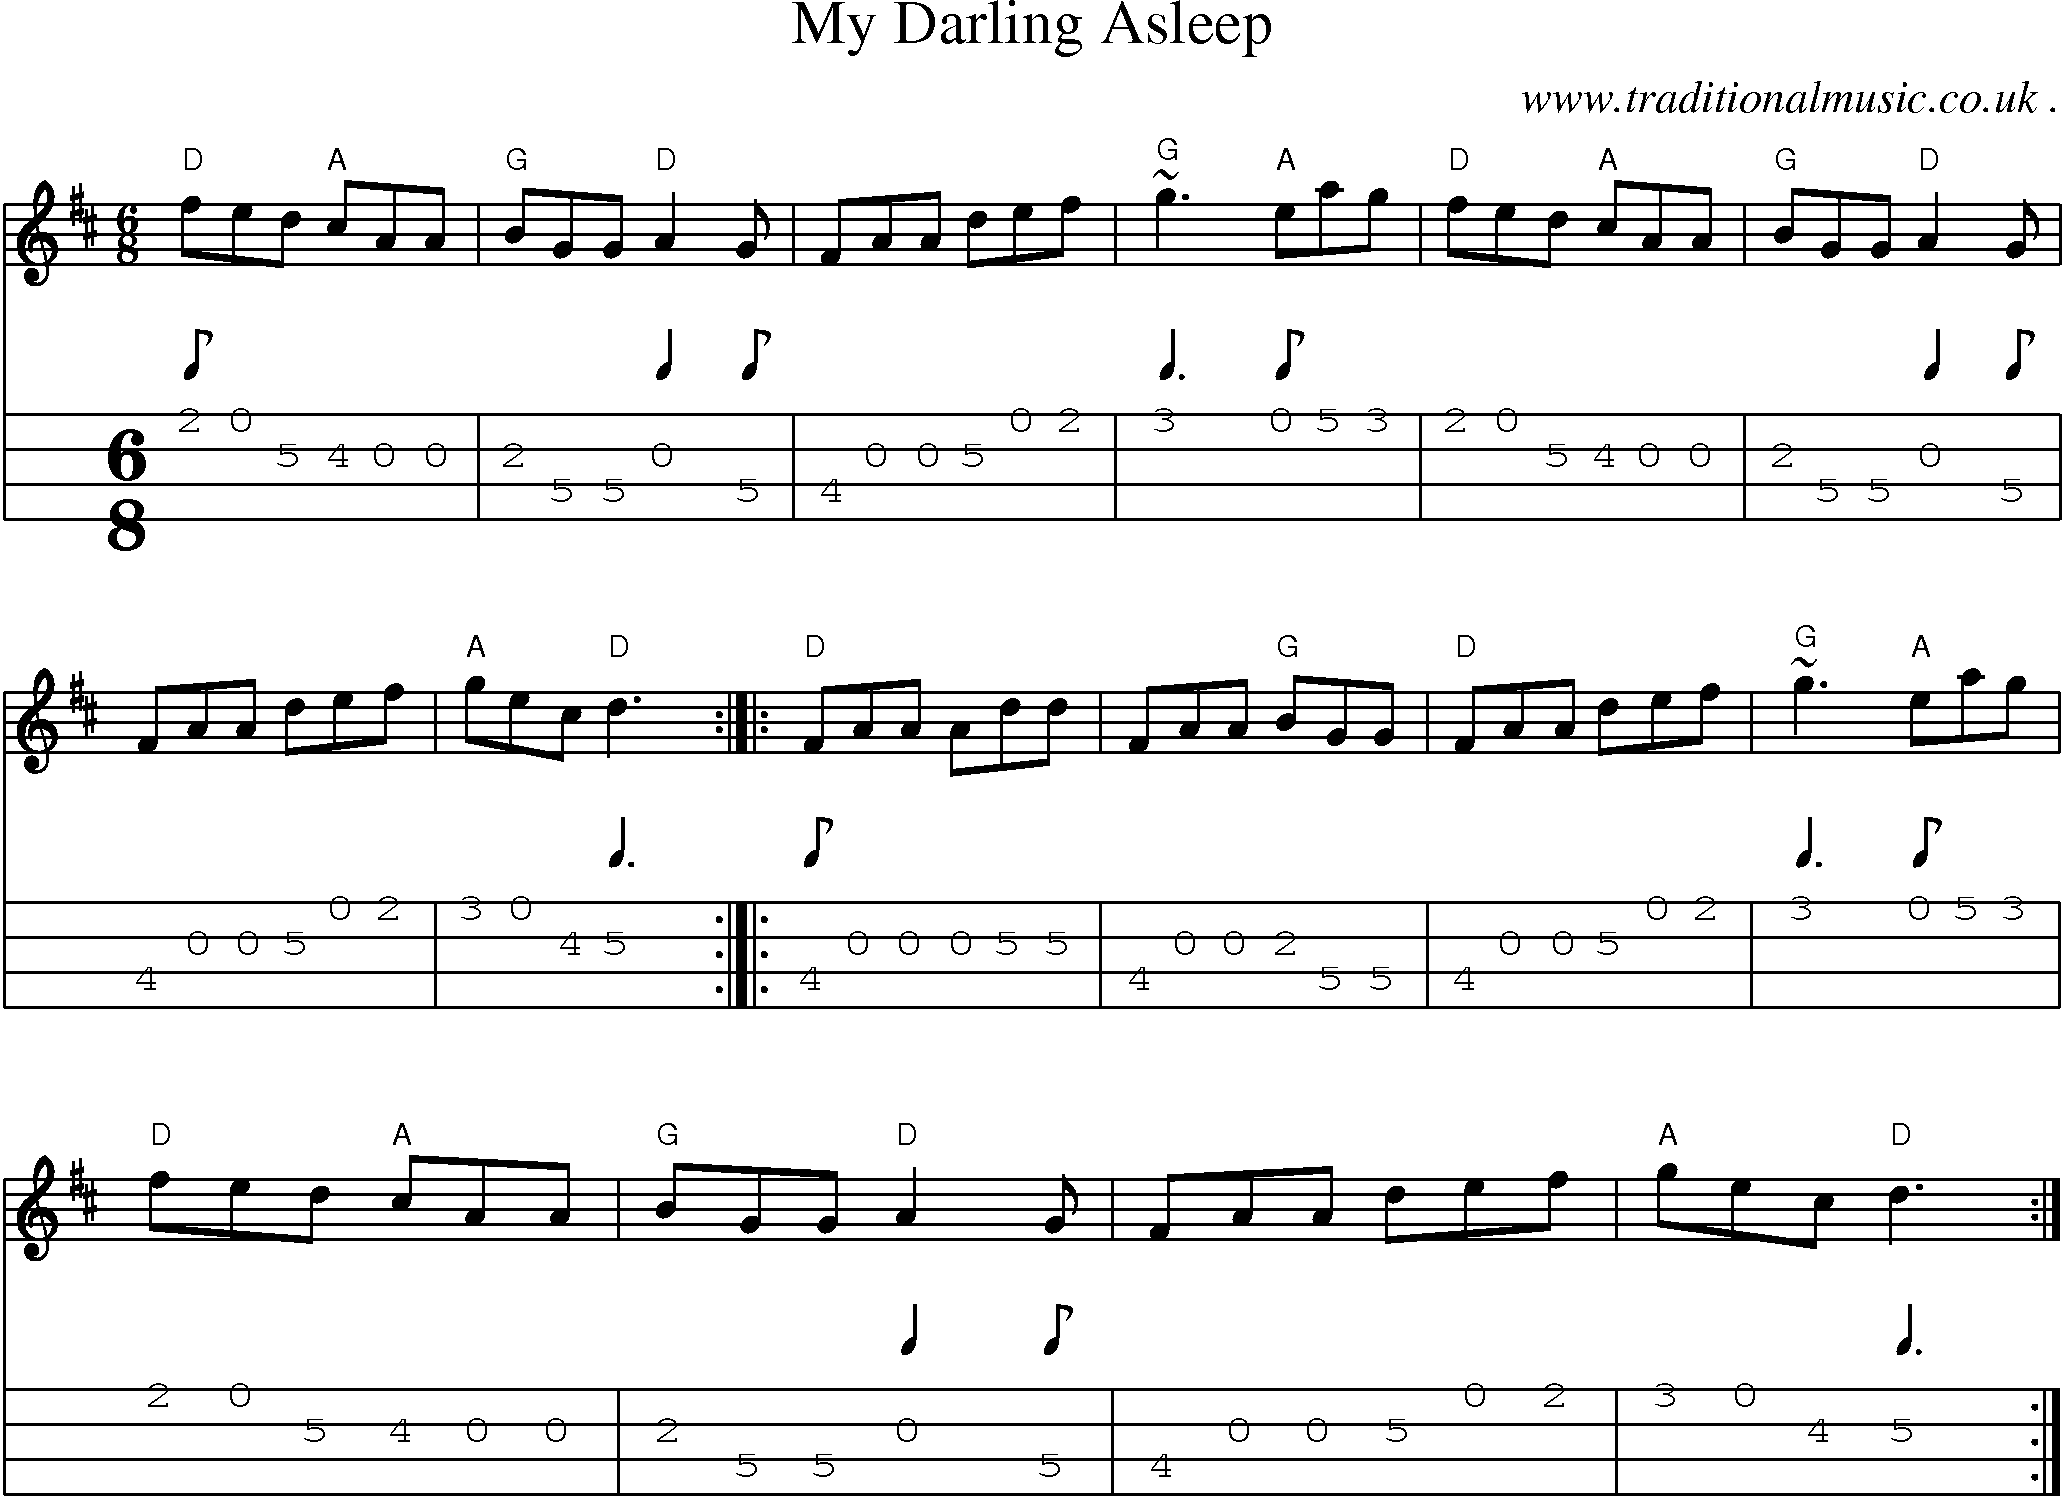 Music Score and Guitar Tabs for My Darling Asleep